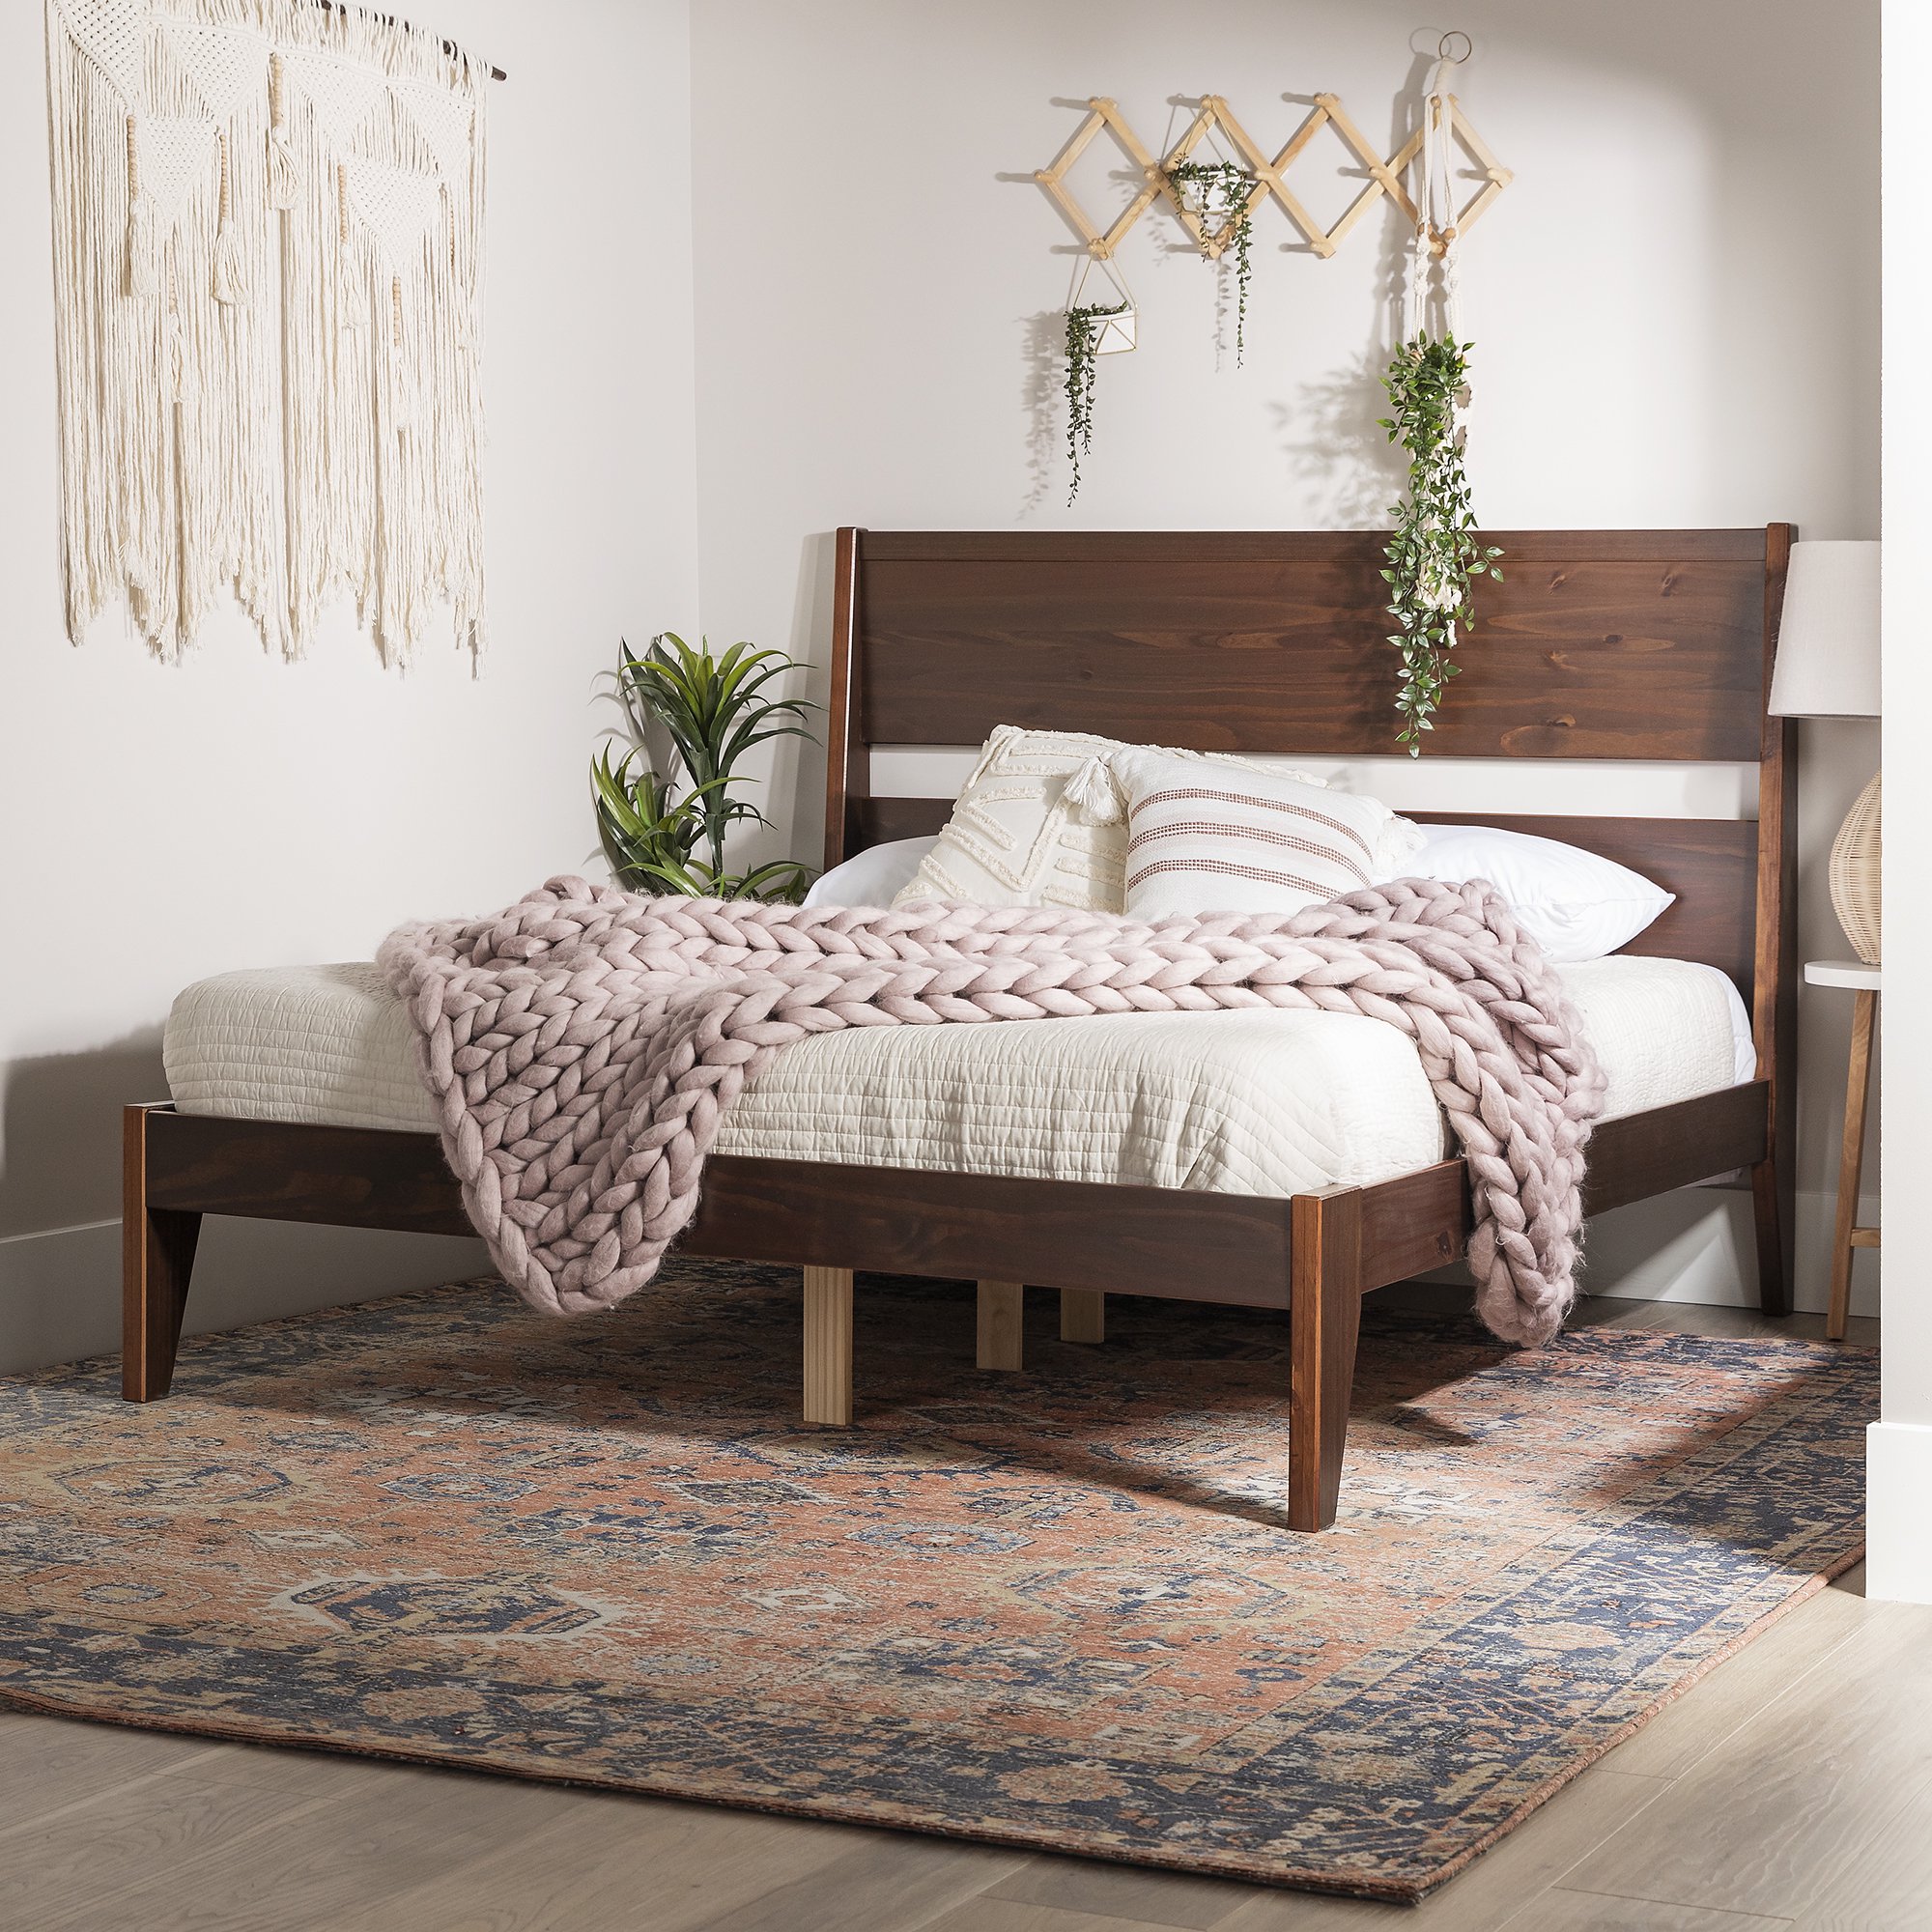 platform bed in walnut with cream bedding and a light pink blanket laid on top